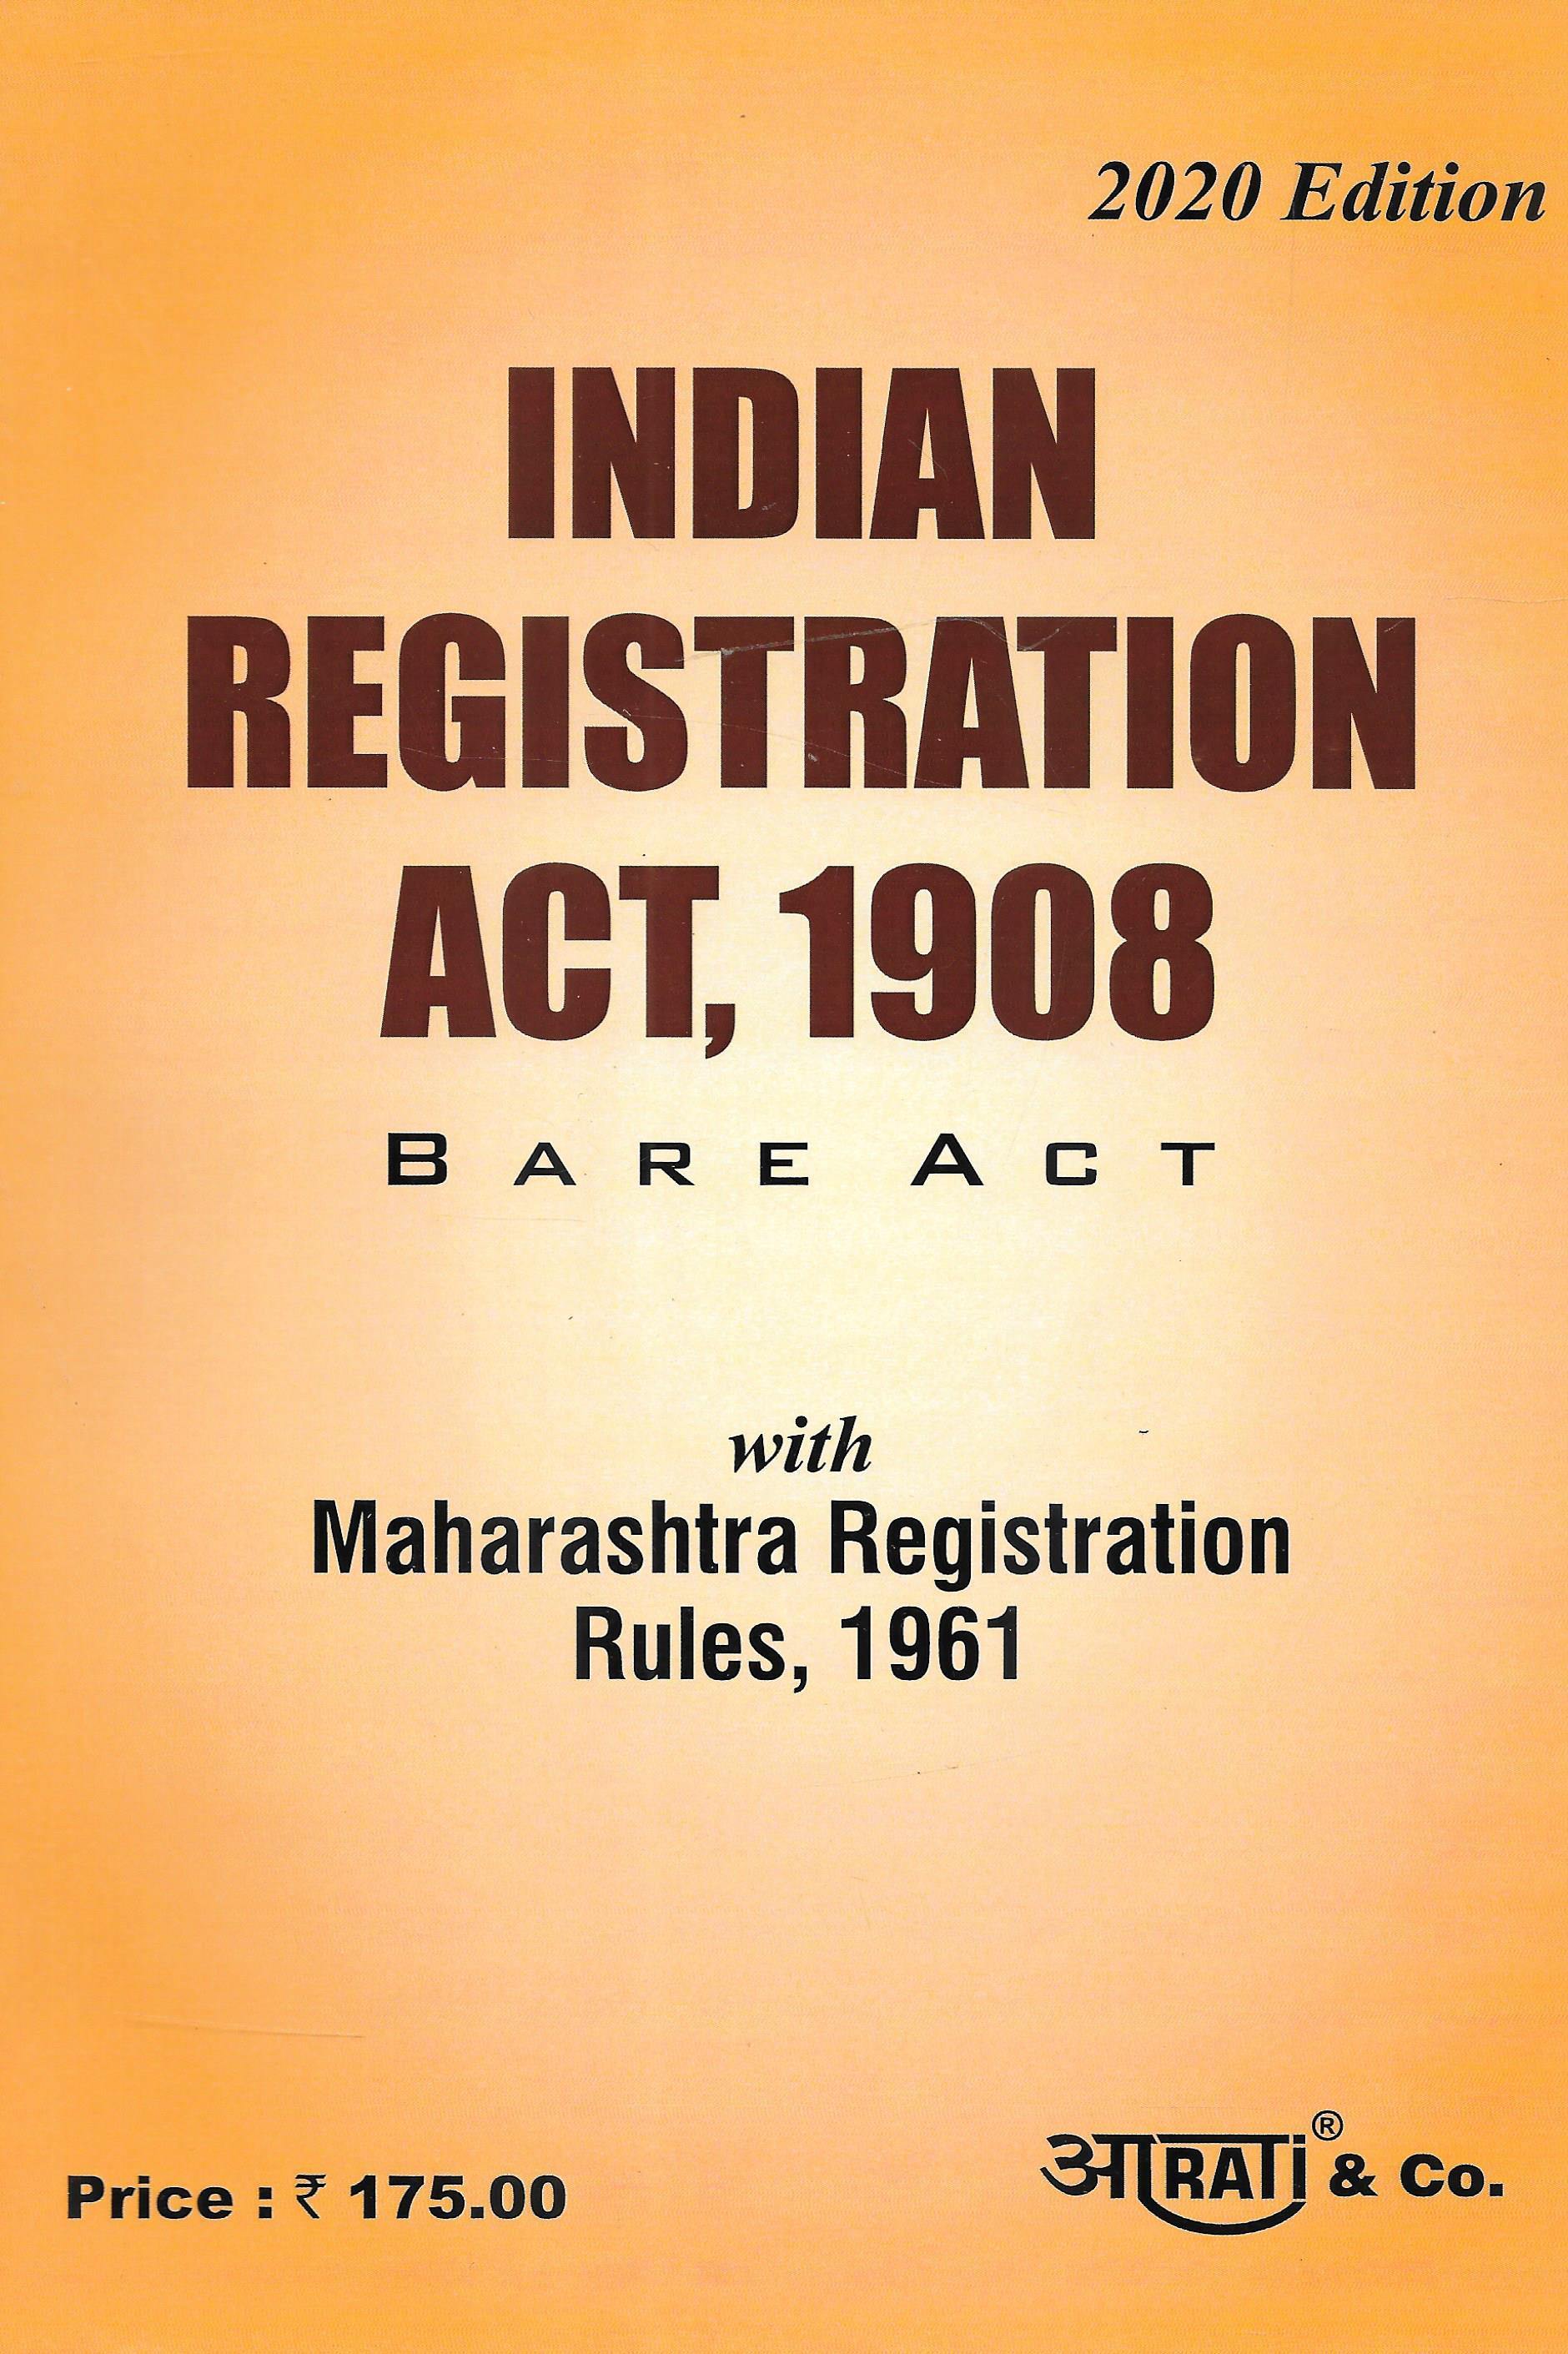 Indian Registration Act, 1908 with Maharashtra Rules - M&J Services